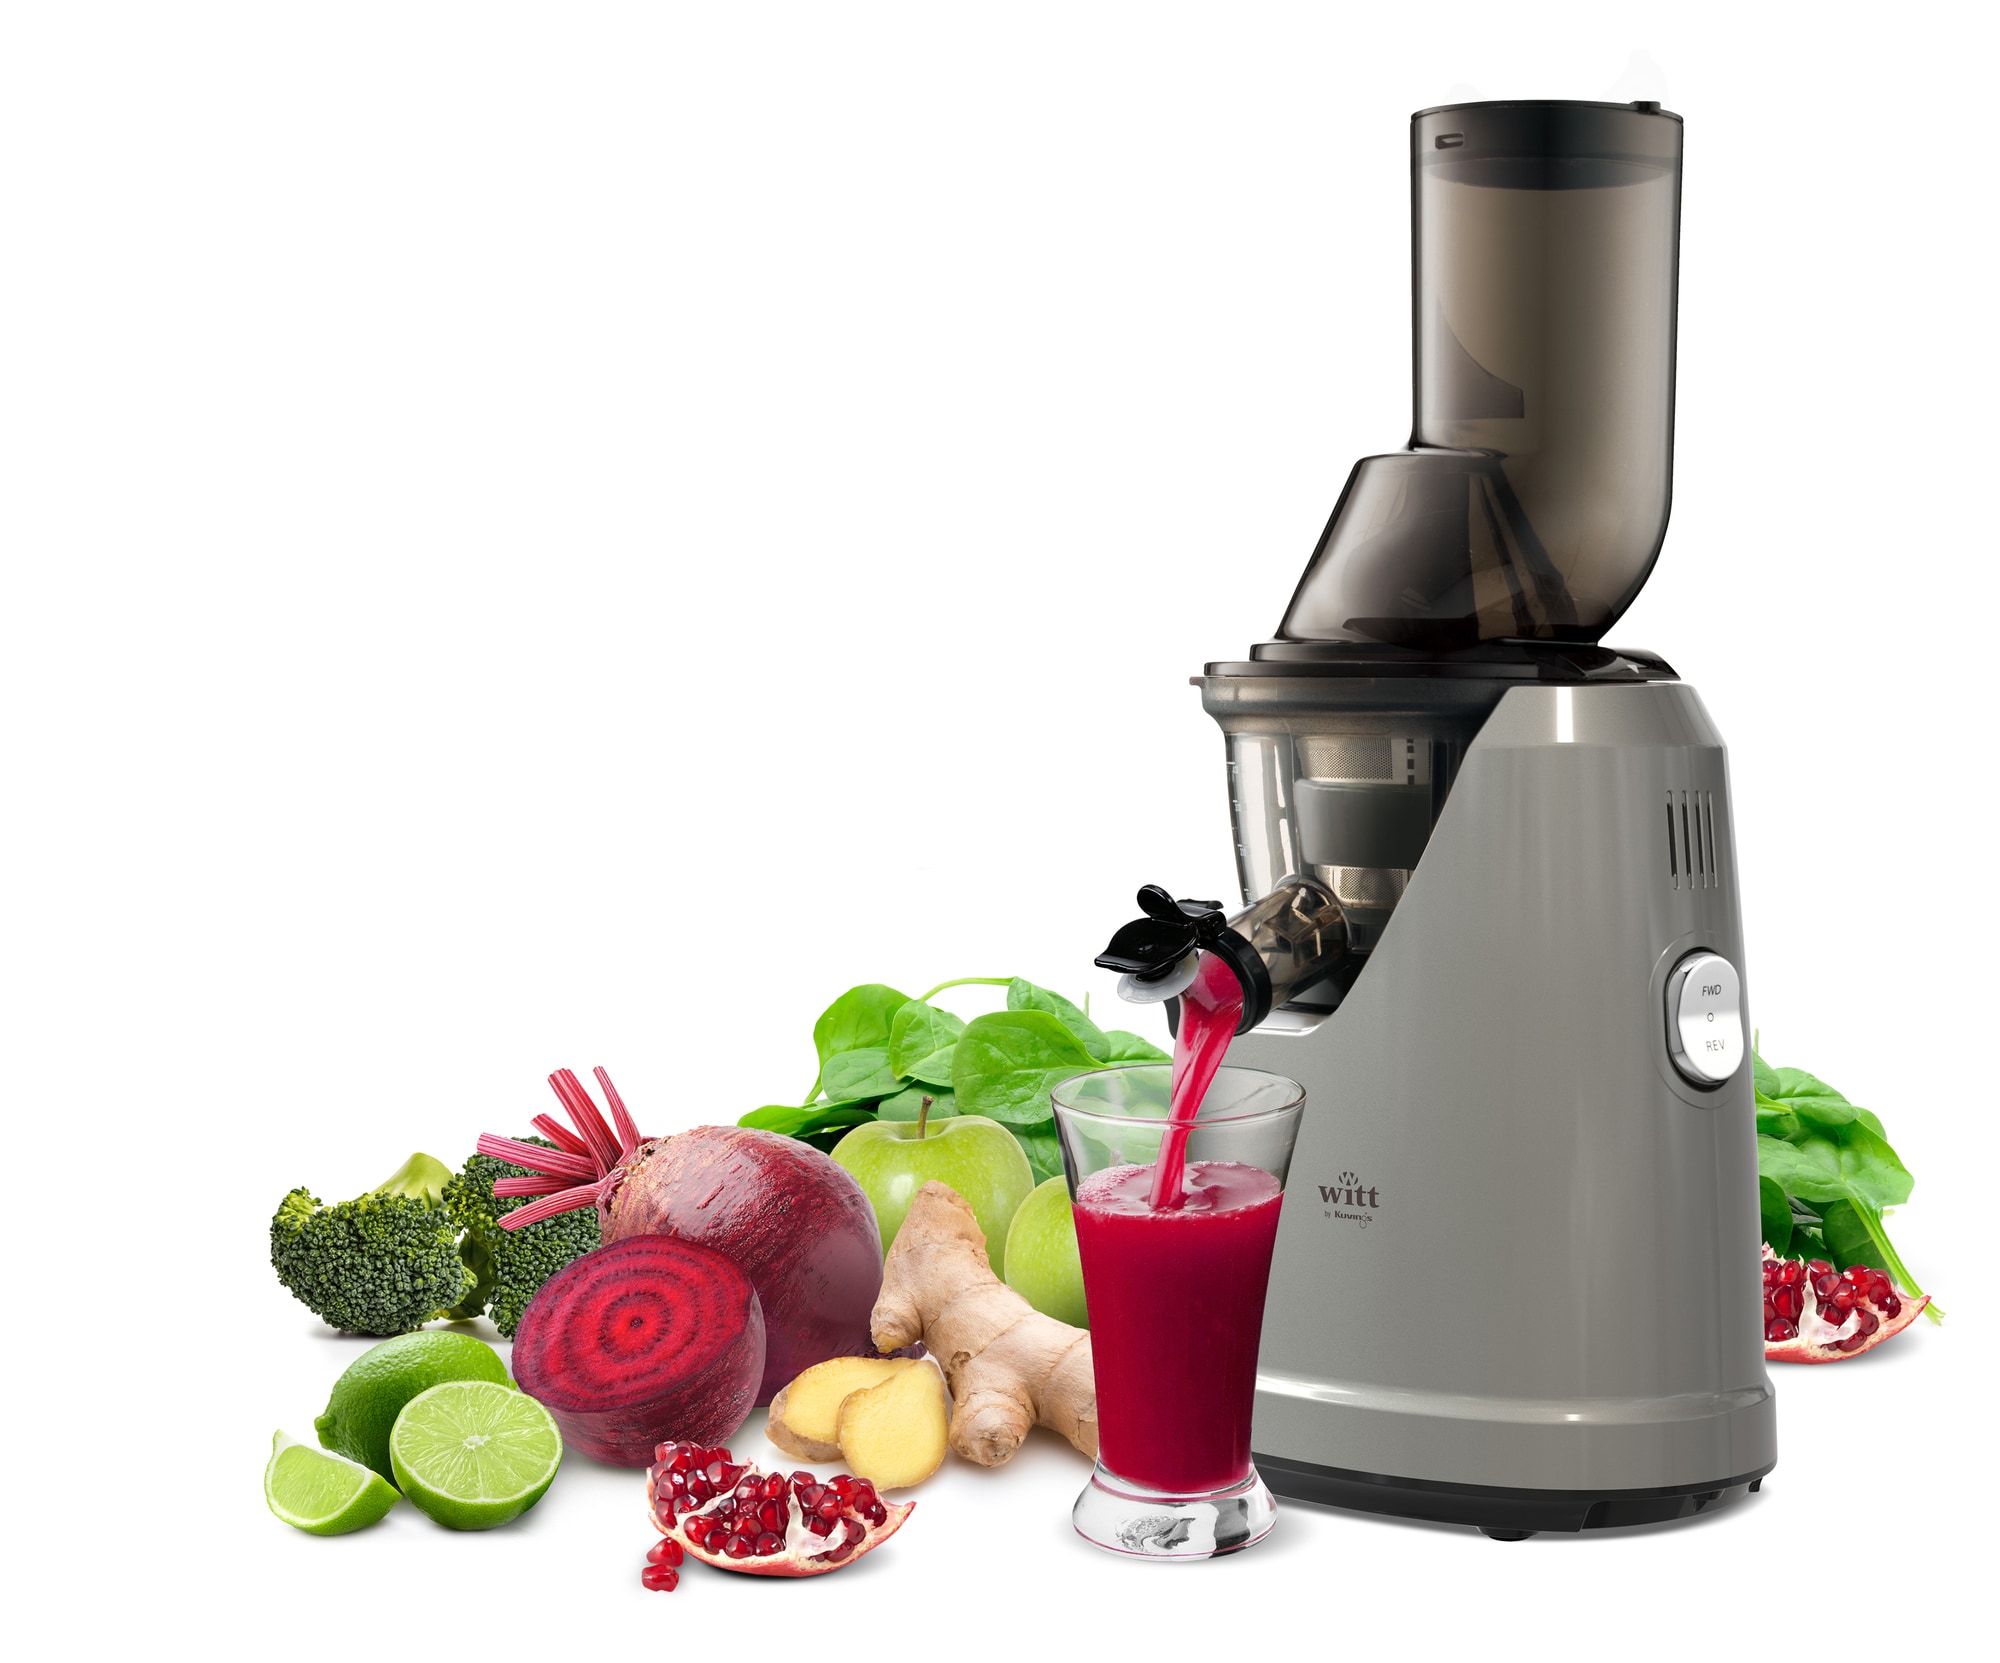 Slow juicer Witt by Kuvings B6